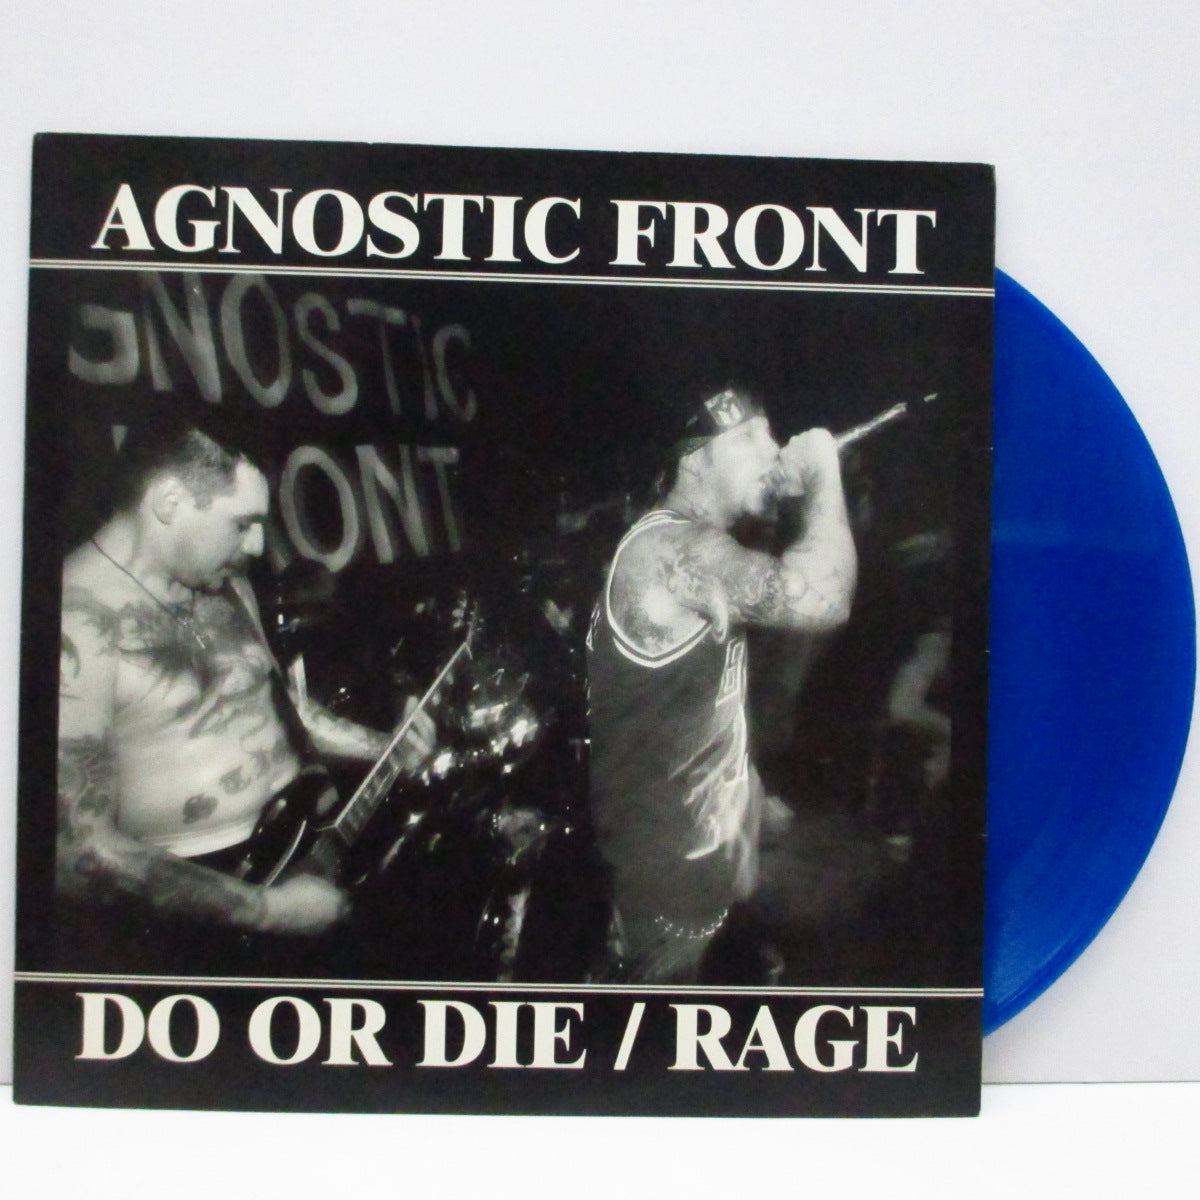 AGNOSTIC FRONT (アグノスティック・フロント) - Do Or Die / Rage (Japan 3